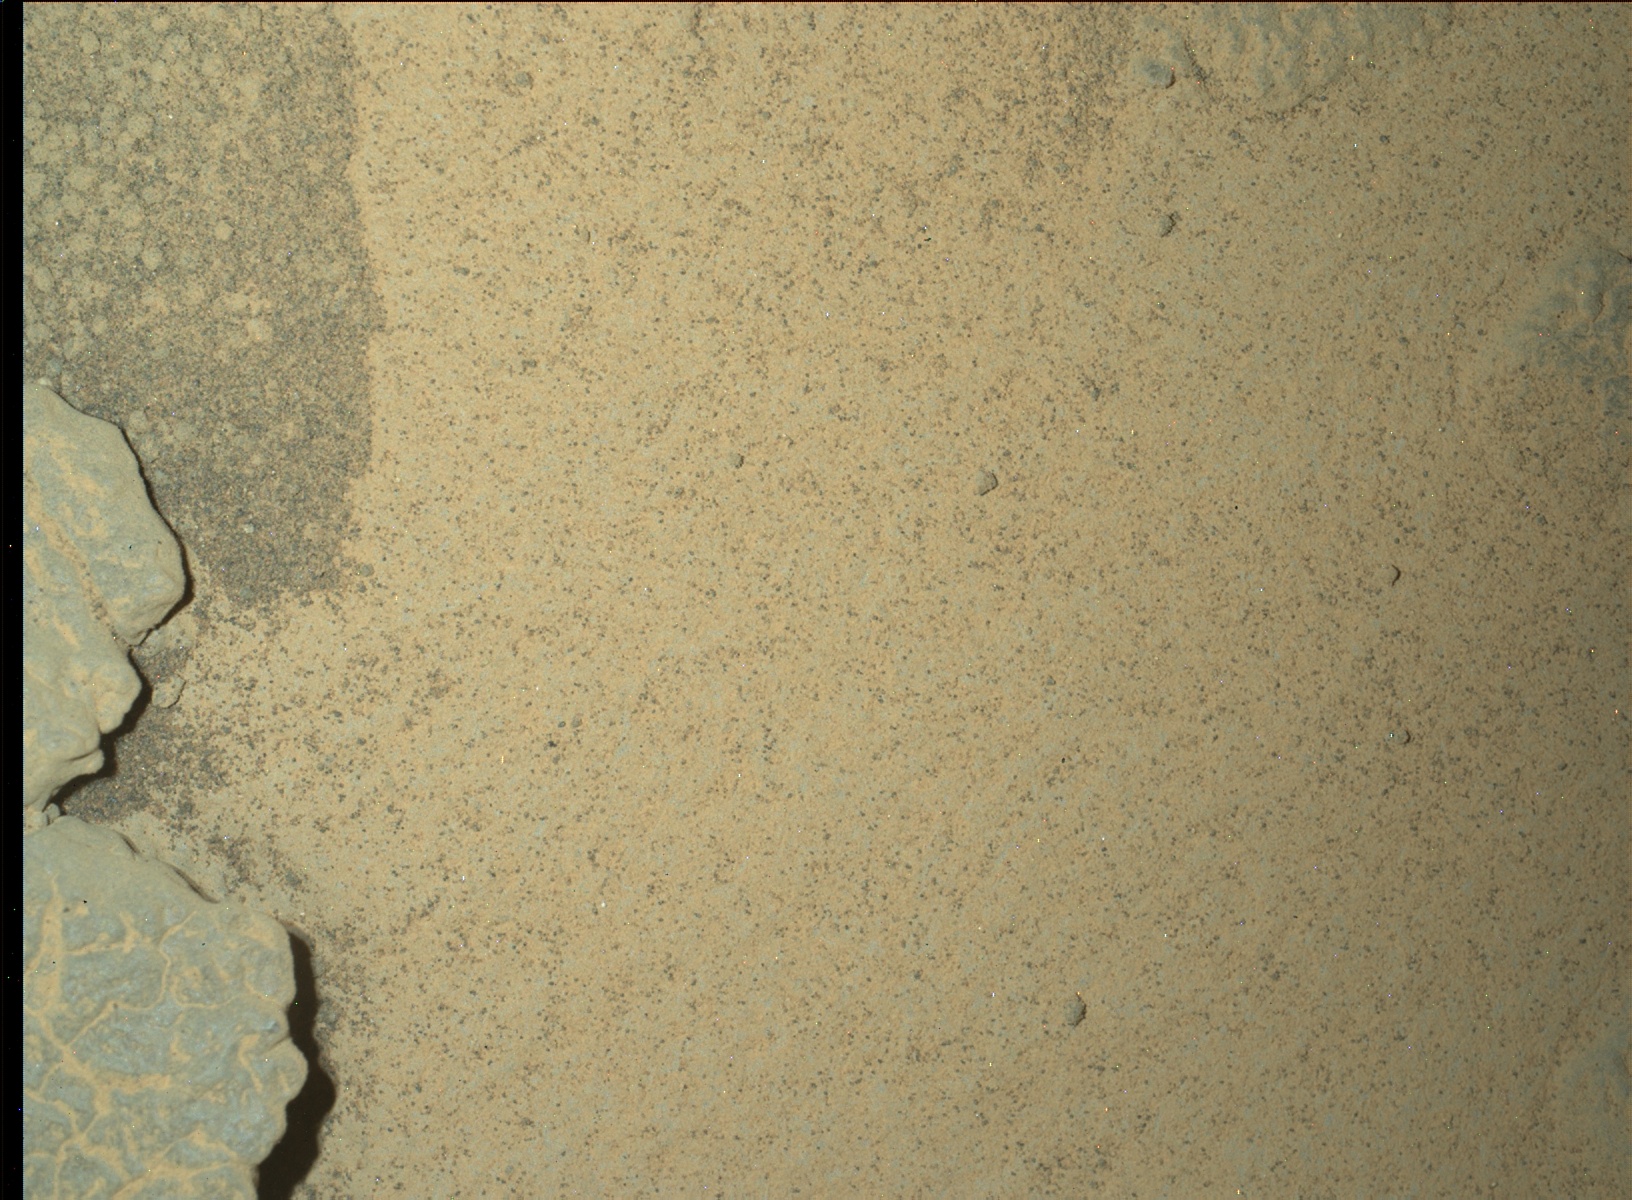 Nasa's Mars rover Curiosity acquired this image using its Mars Hand Lens Imager (MAHLI) on Sol 810